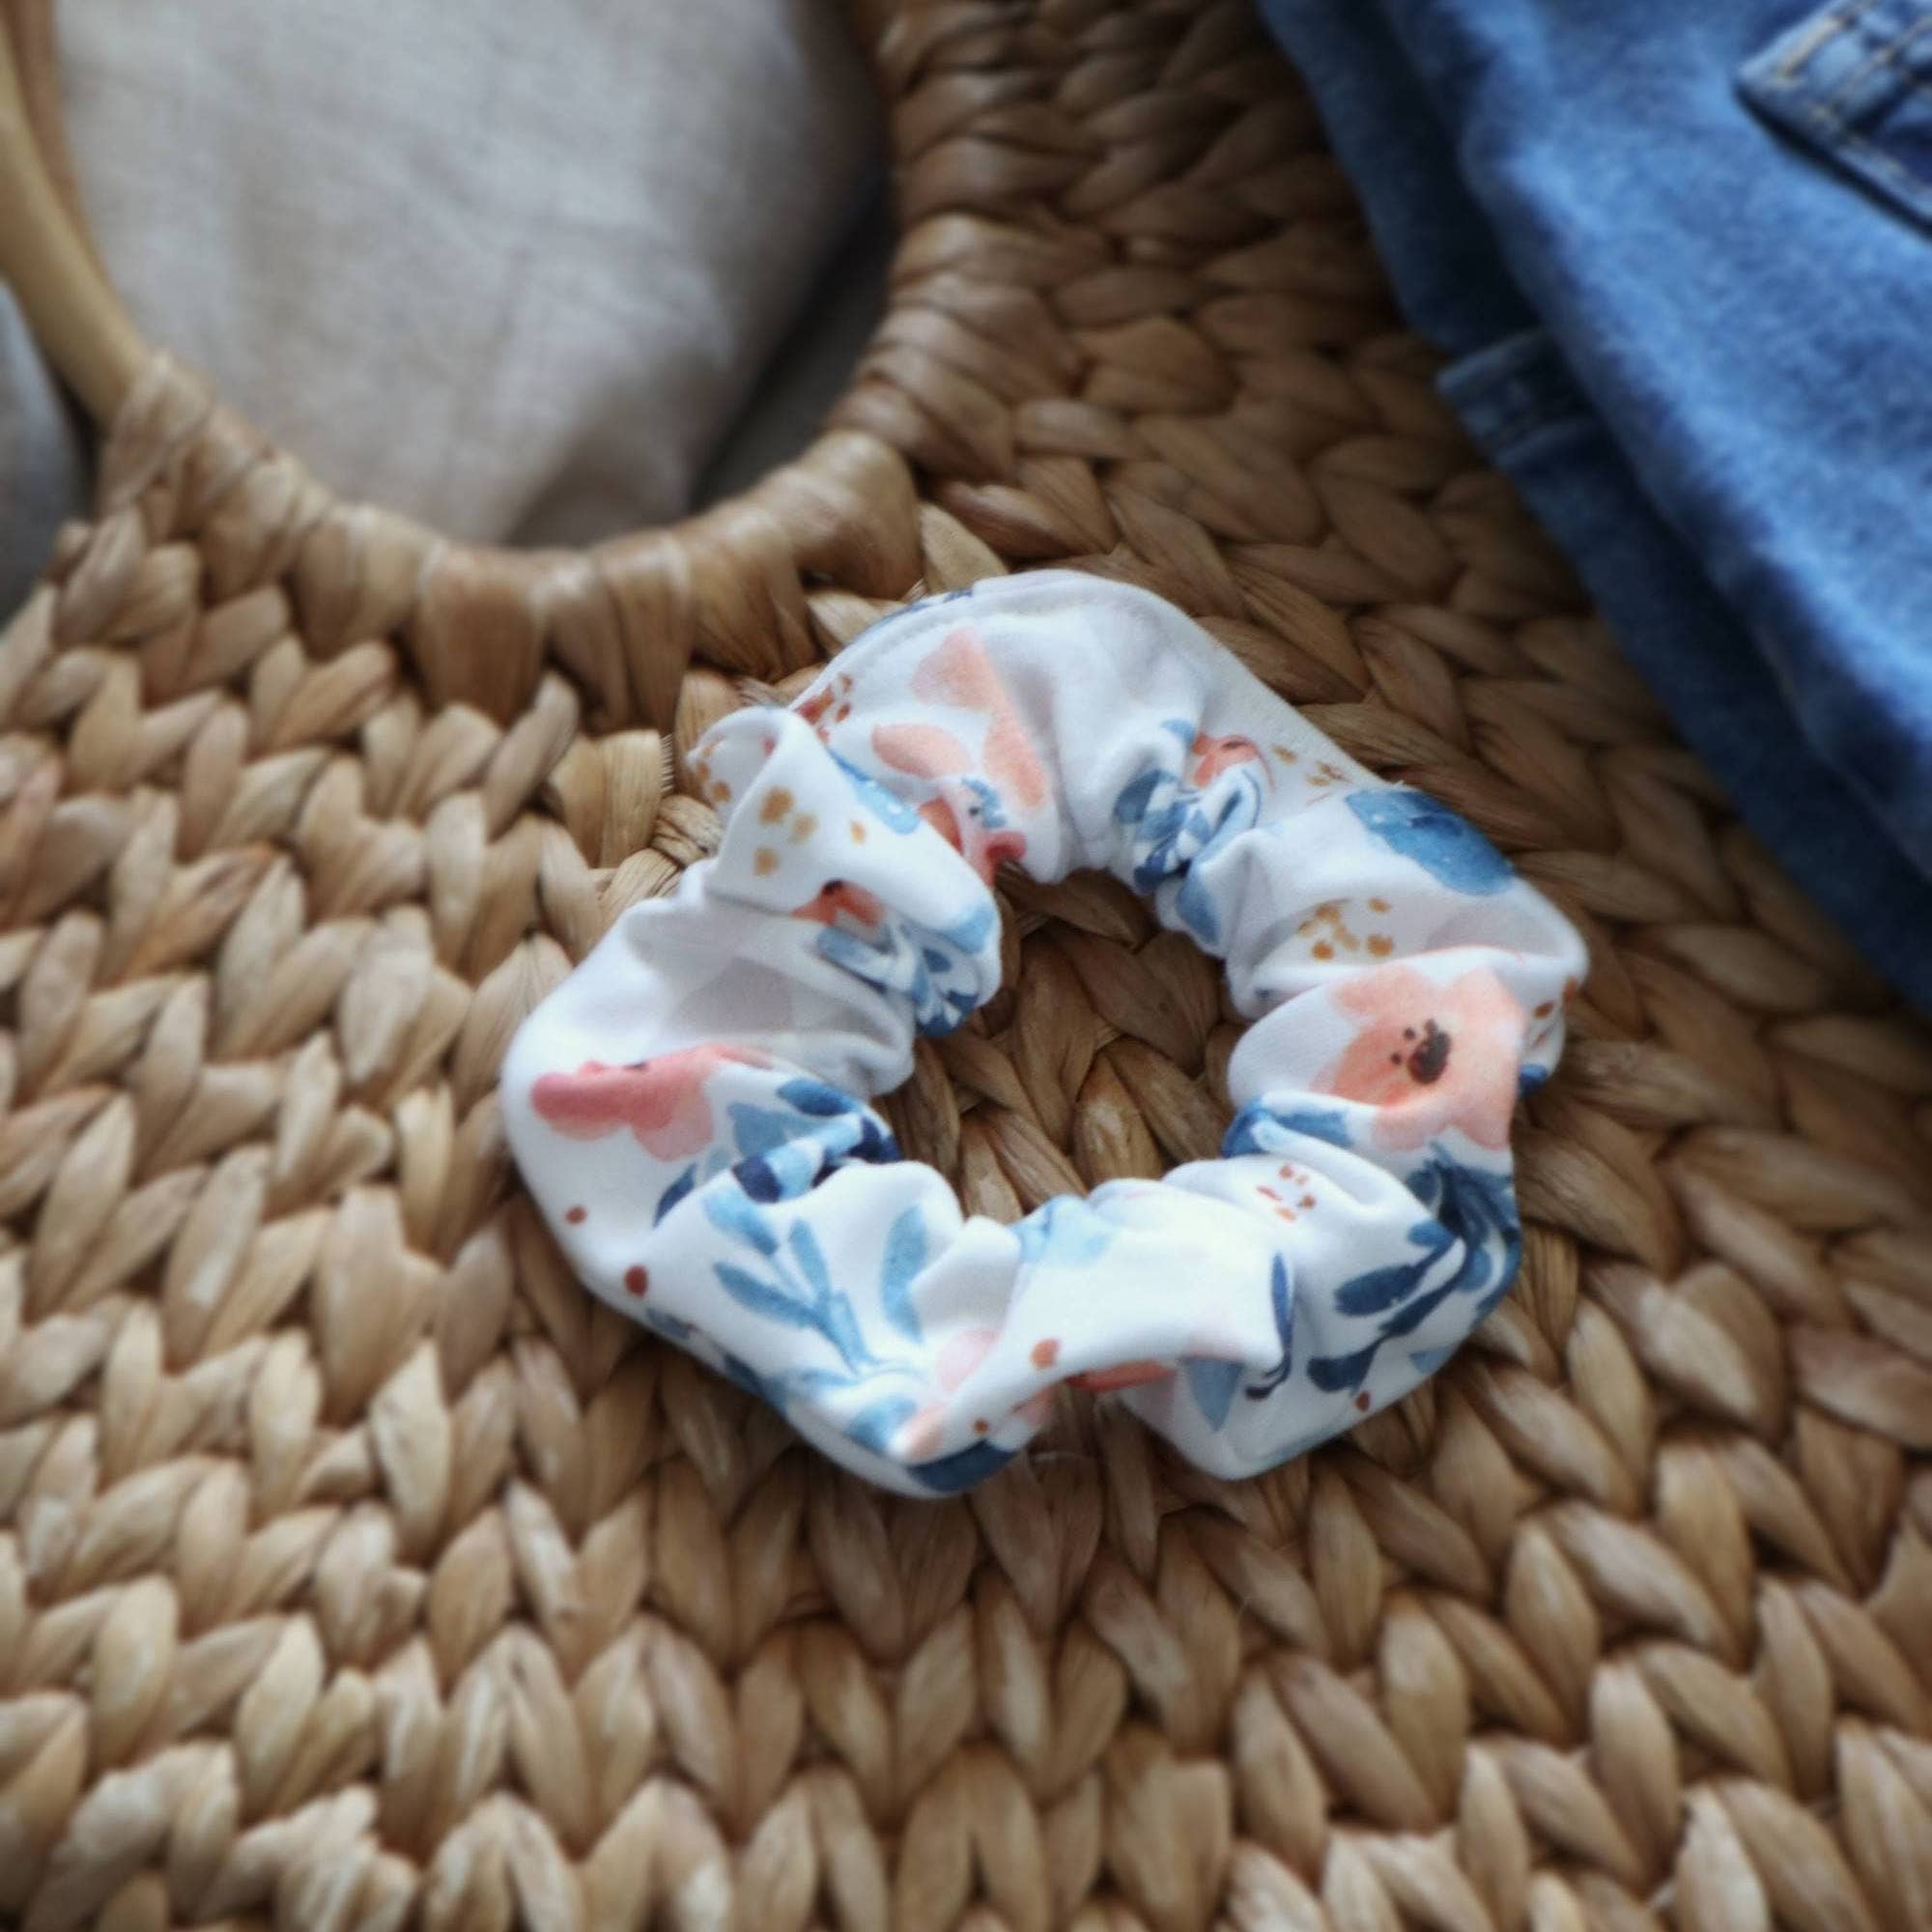 Freon Collective - Organic Cotton Hair Scrunchie - Fawn Florals